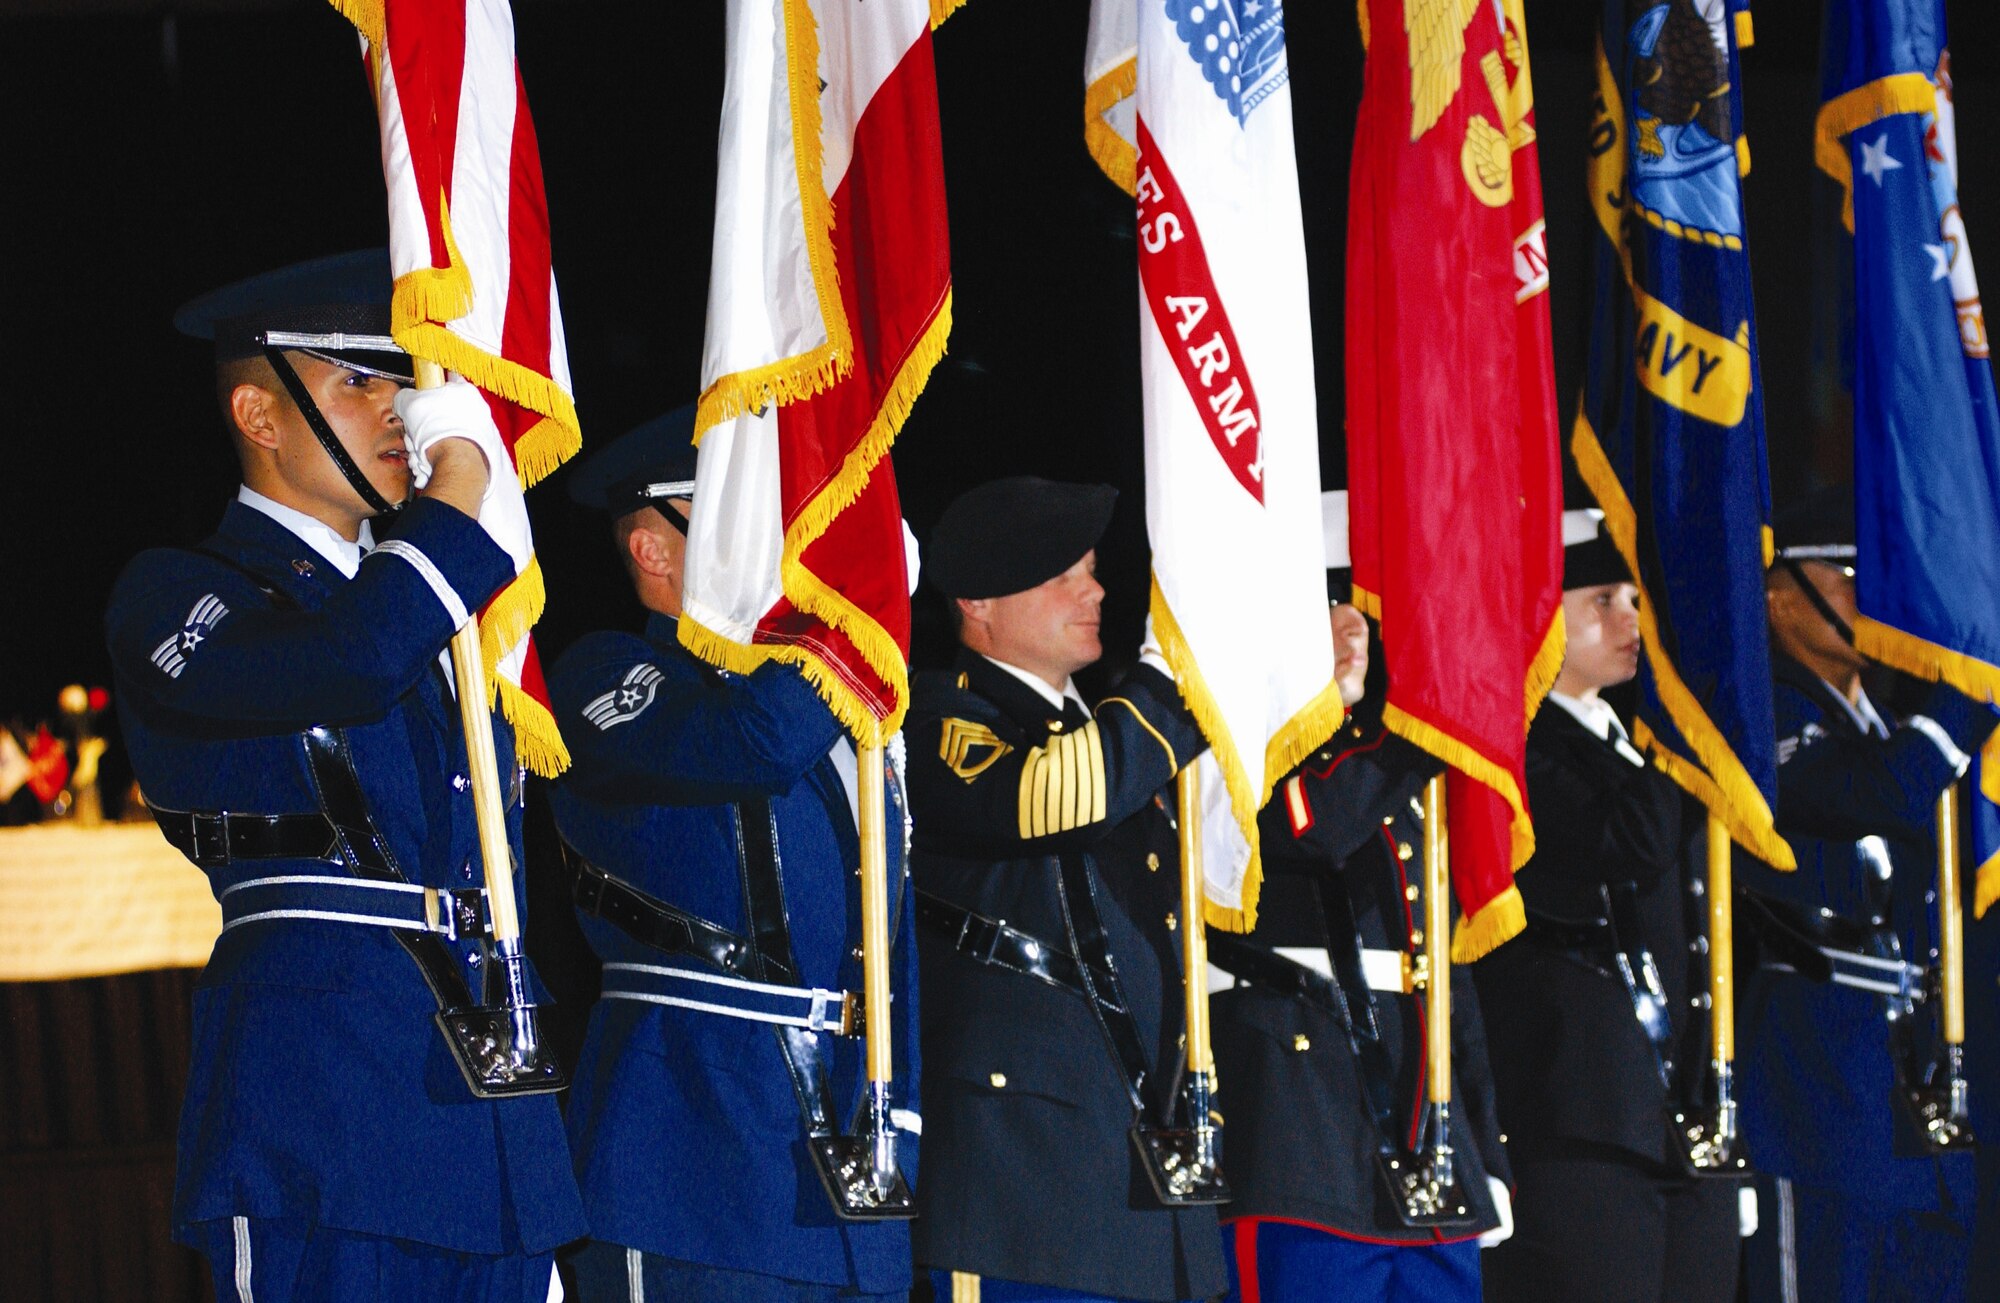 An honor guard made up of members from each branch of the service performed the military ceremonies at the opening of the ball.  (U.S. Air Force photos by Master Sgt. Keith Baxter/ 4th CTCS)